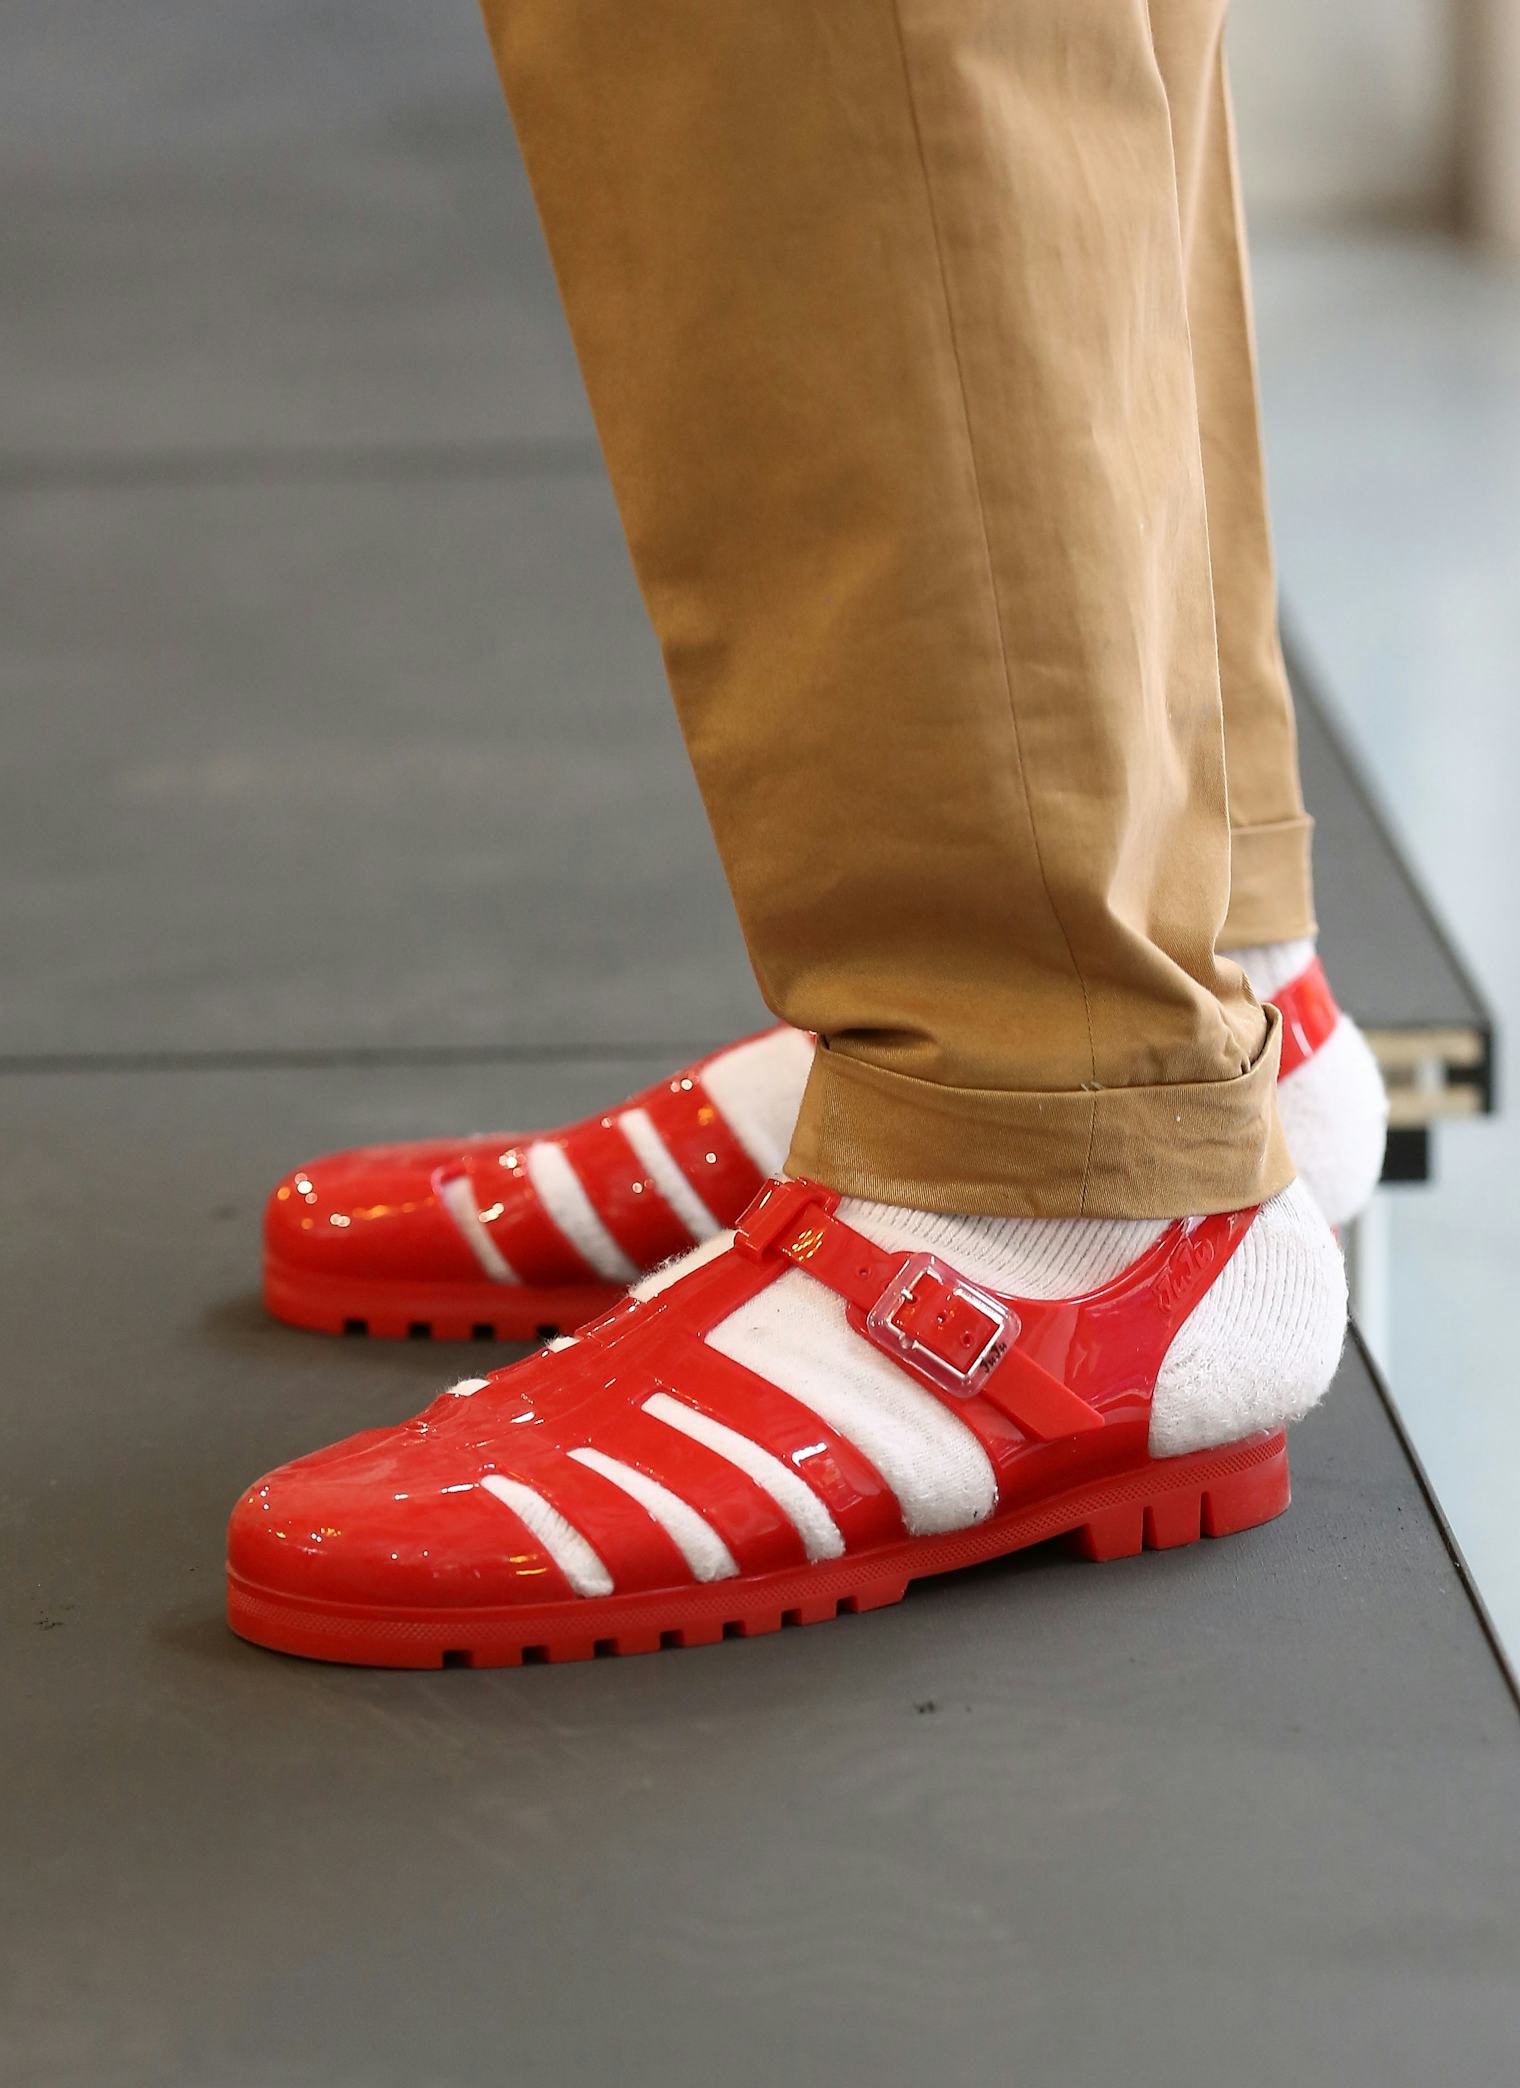 Are Socks With Sandals Cool? The Trend Is More Popular Than You ...